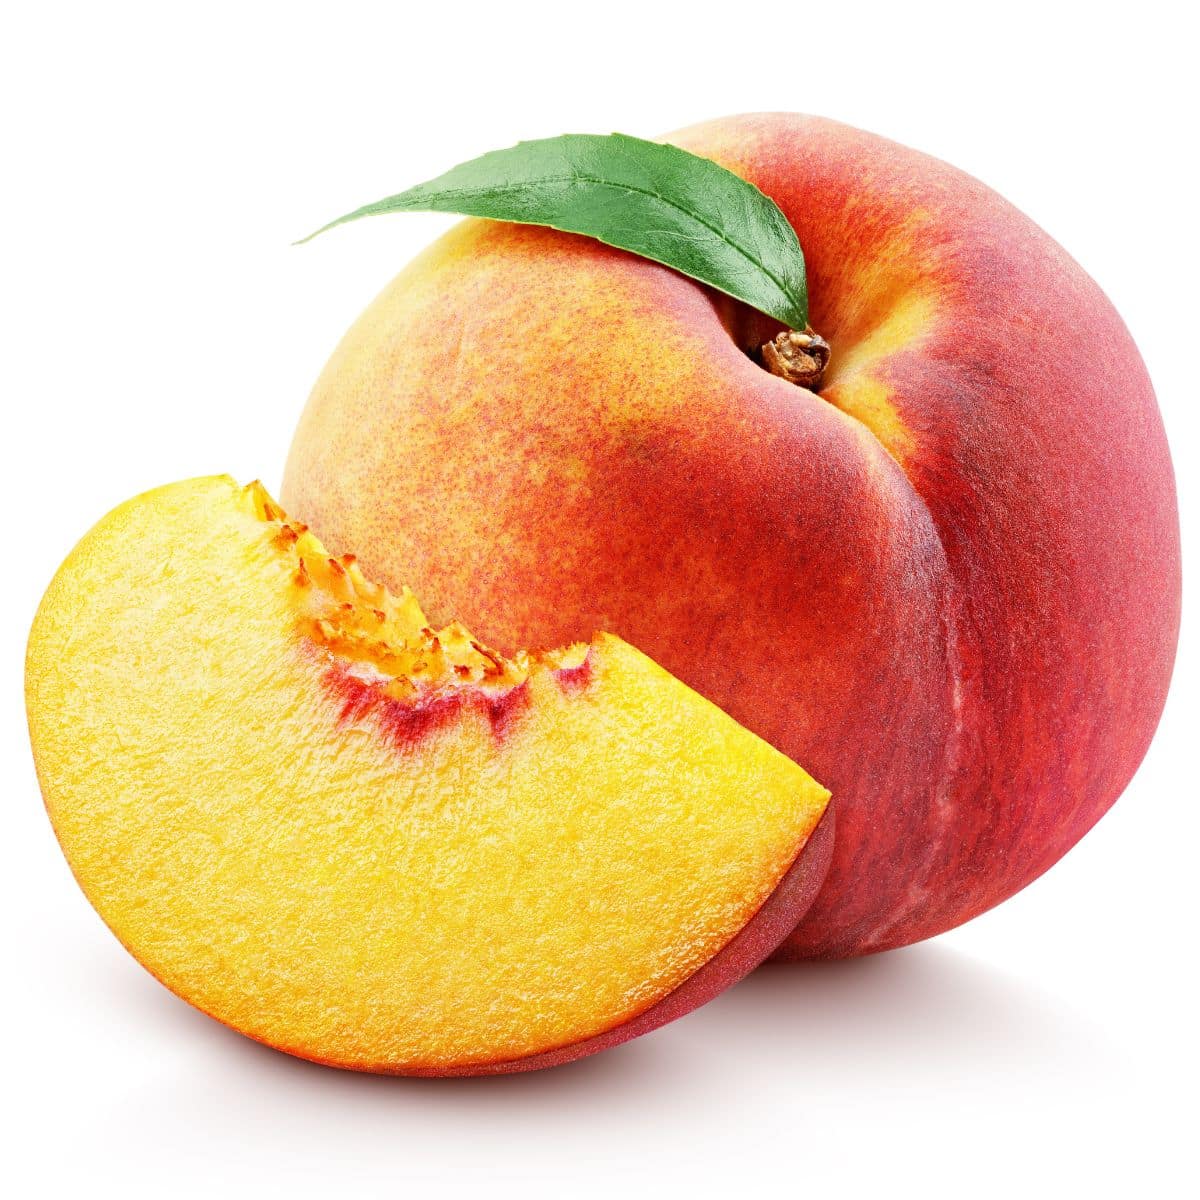 Red haven peach on a white background.